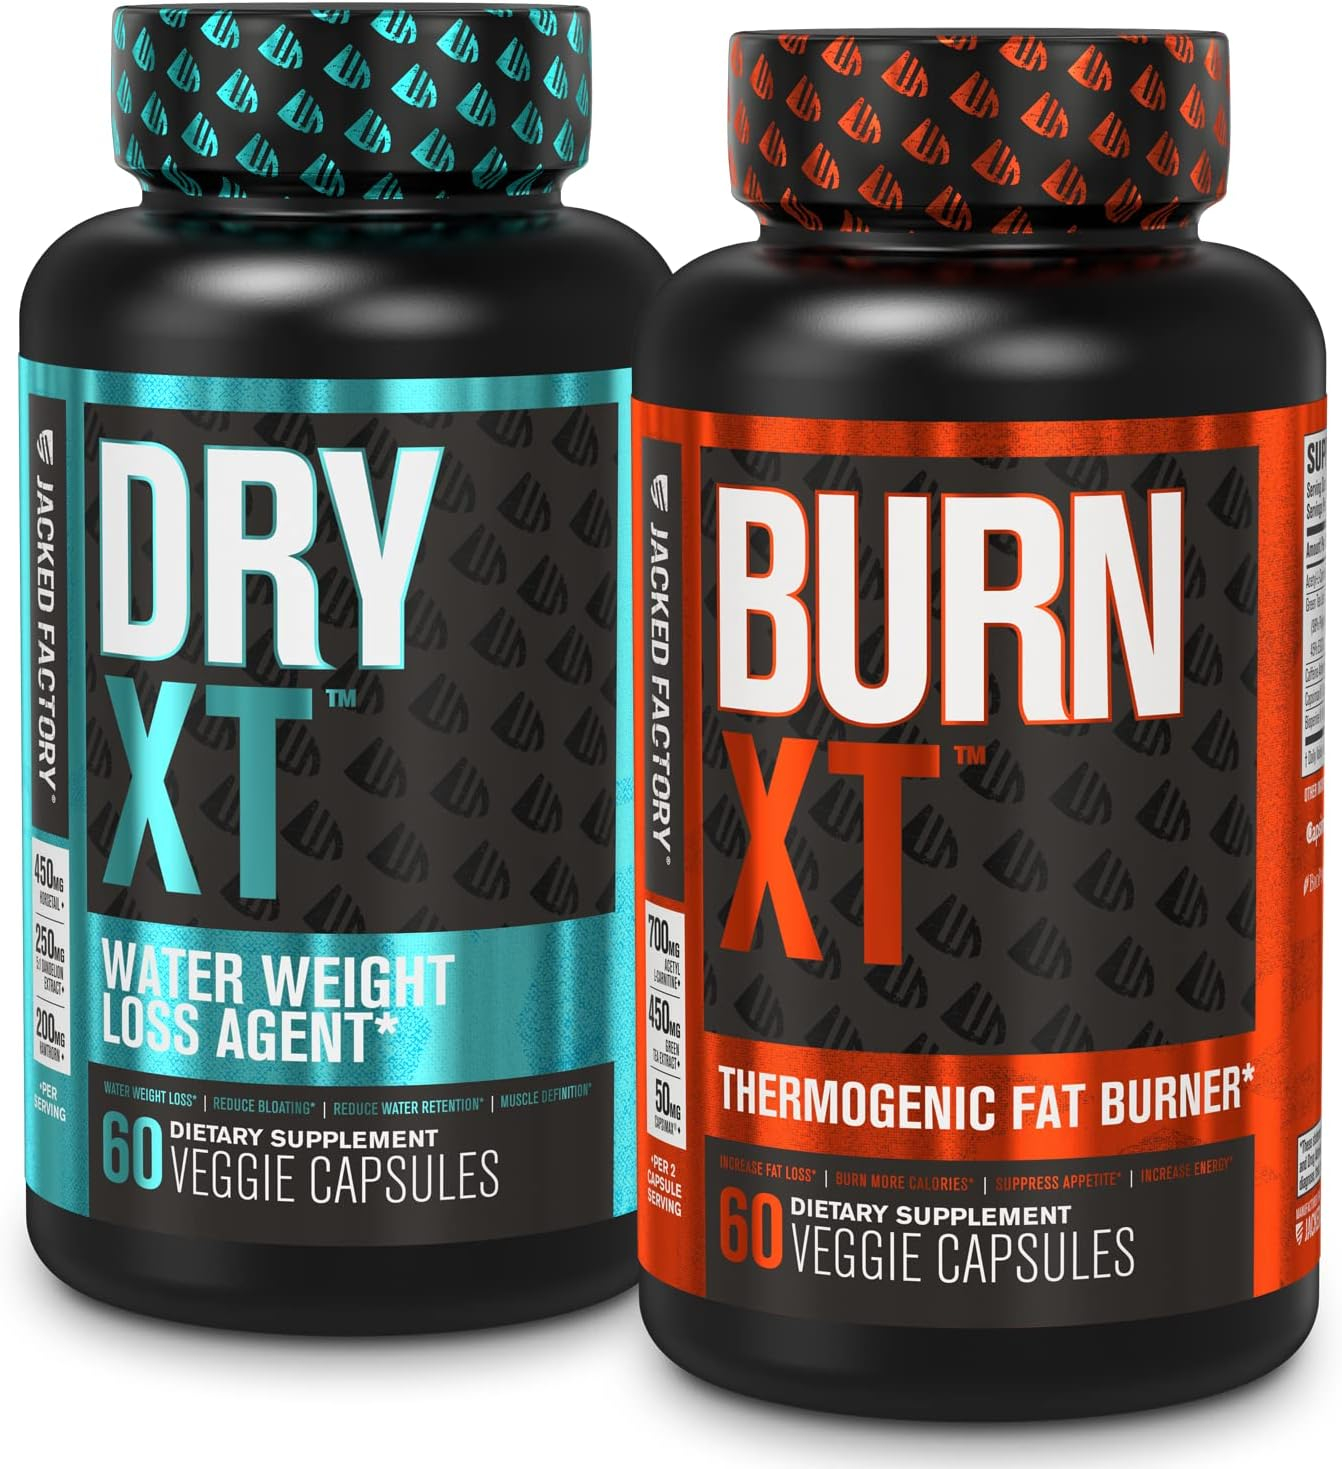 Burn-XT Thermogenic Fat Burner - Weight Loss Supplement  Appetite Suppressant - 60 Capsules  Dry-XT Water Weight Loss Diuretic Pills - Natural Supplement for Reducing Water Retention - 60 Capsules